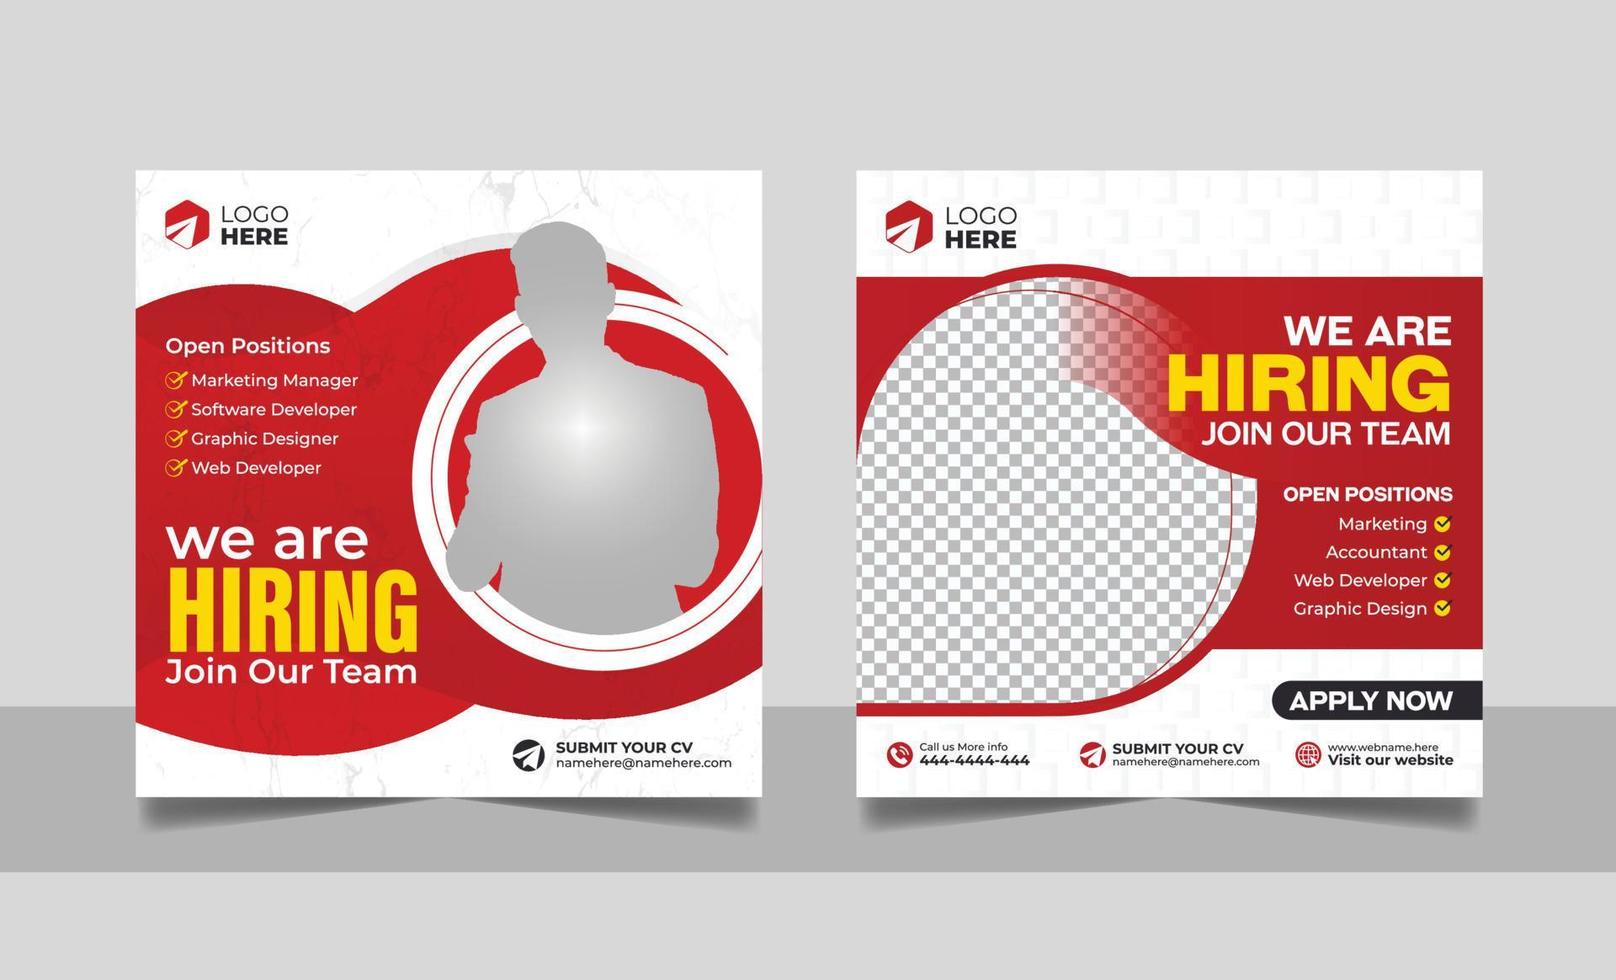 We are hiring social media post job vacancy banner template with black red color. corporate employee recruitment square flyer design. vector